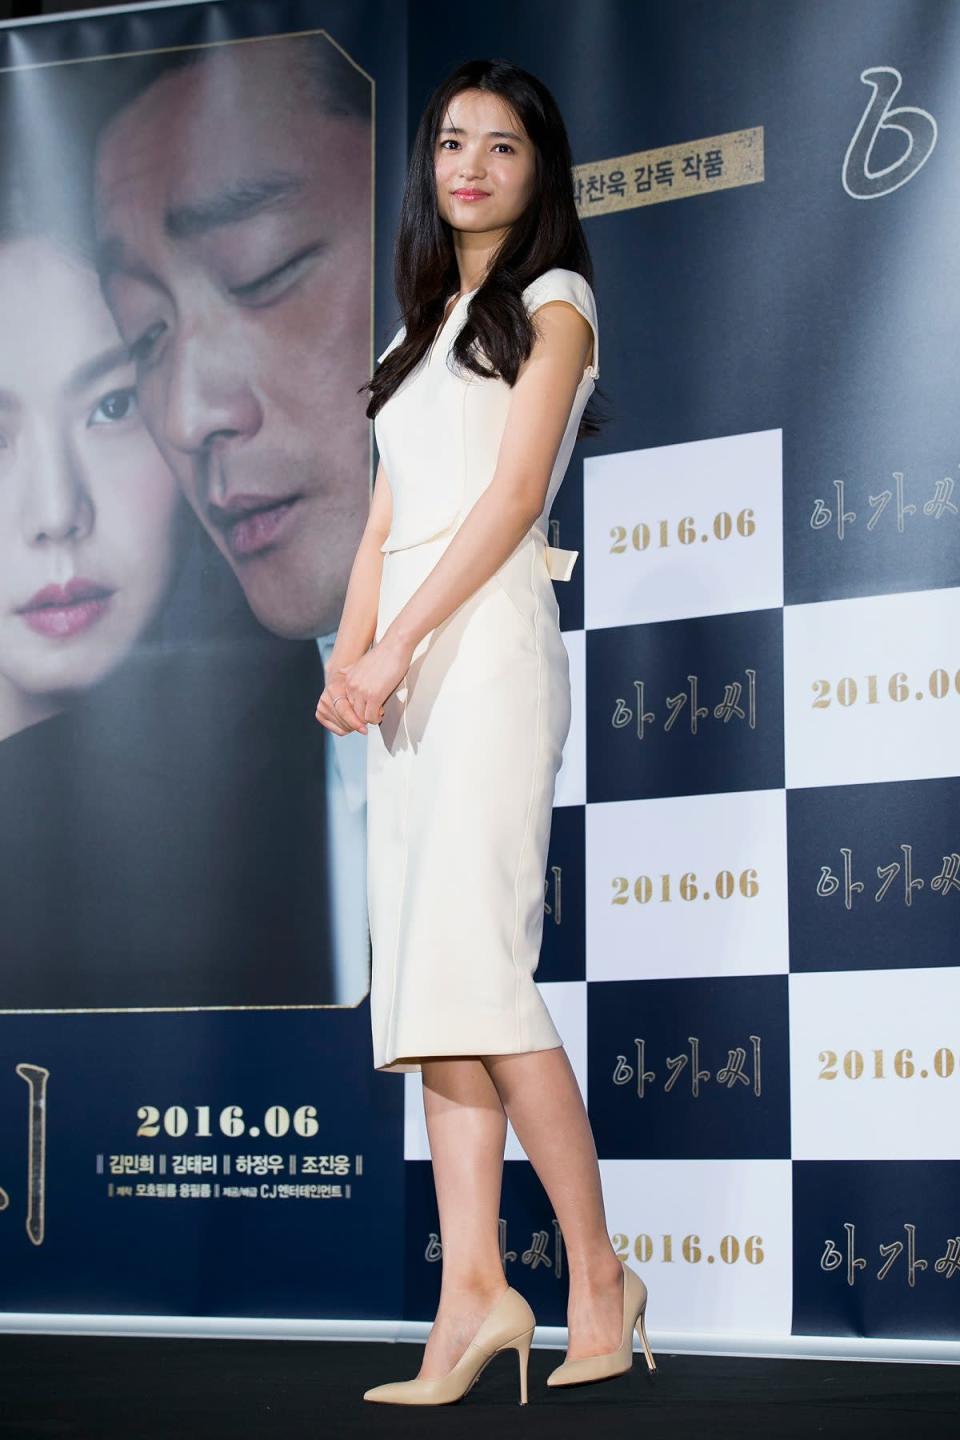 SEOUL, SOUTH KOREA - MAY 02: South Korean actress Kim Tae-Ri attends the press conference for 'The Handmaiden' on May 2, 2016 in Seoul, South Korea. (Photo by Han Myung-Gu/WireImage)